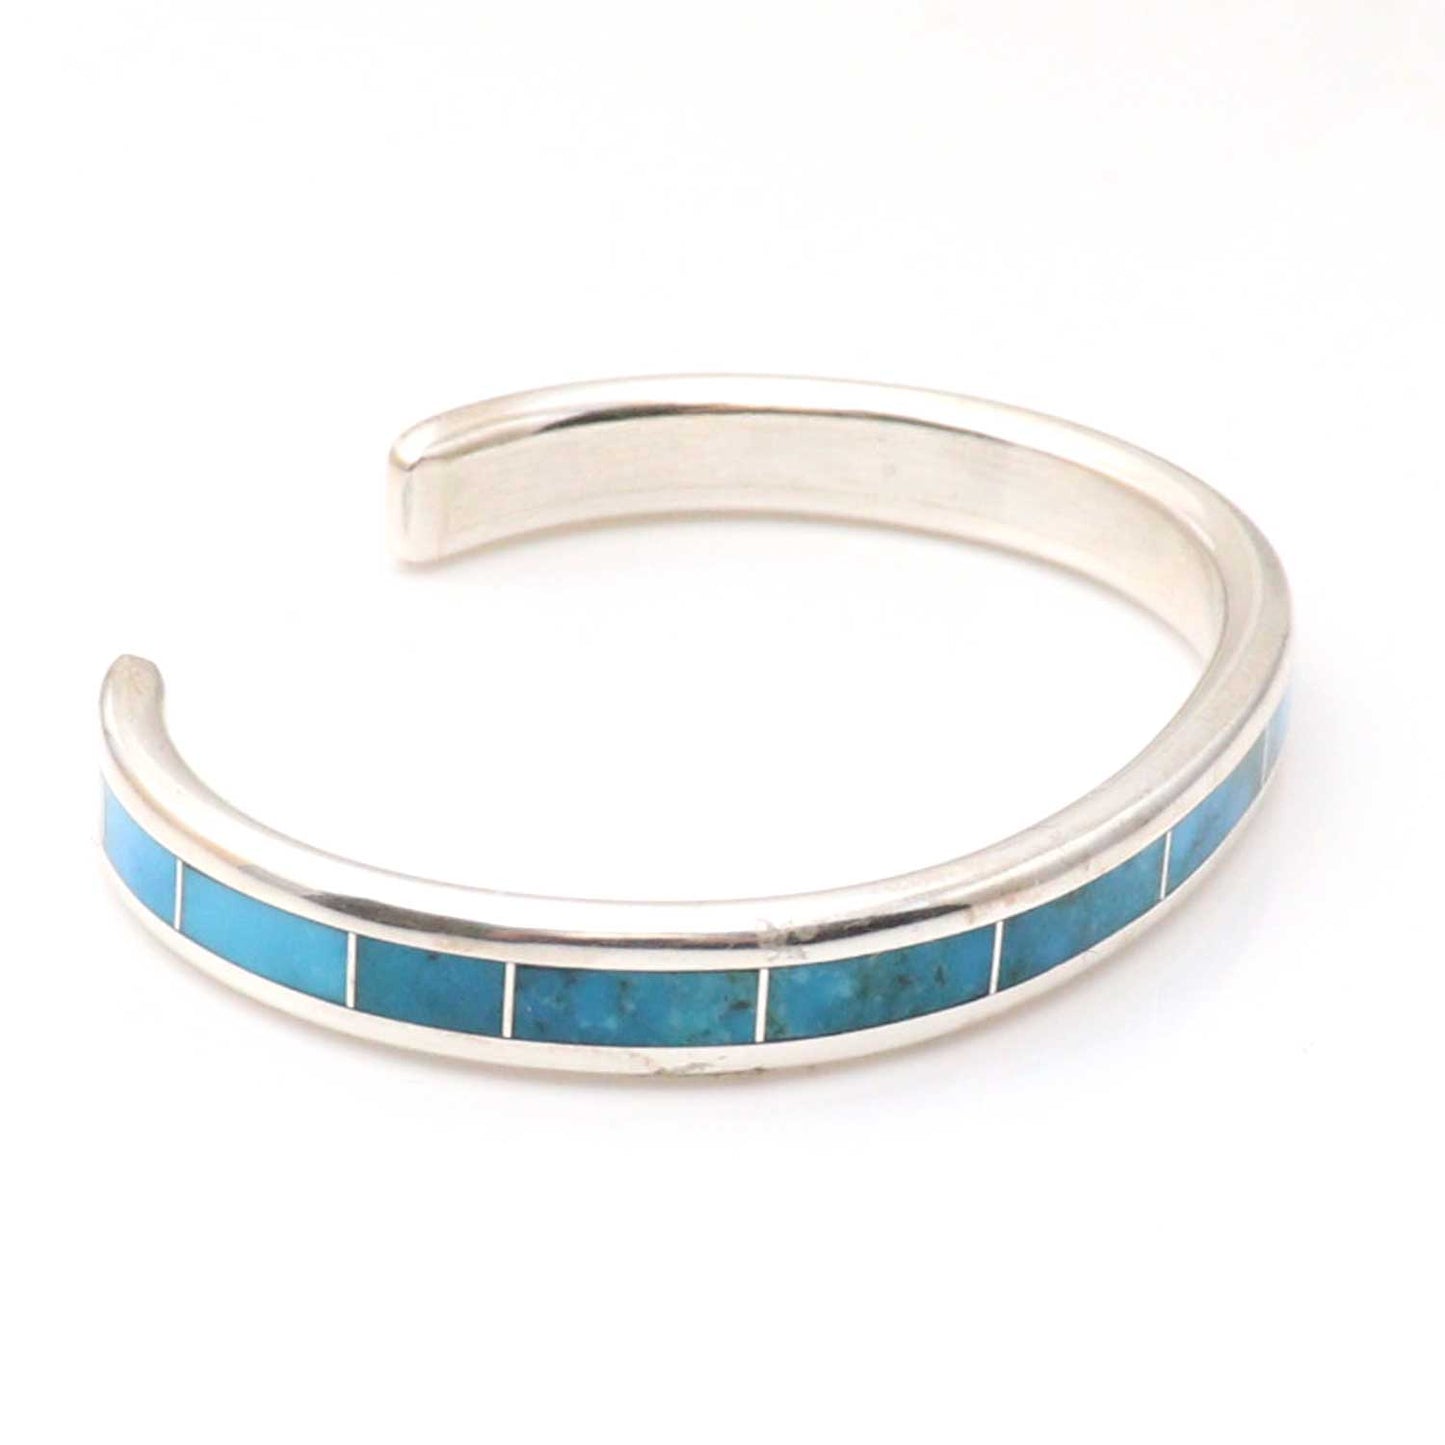 Turquoise Inlay Bracelet by Larry Loretto